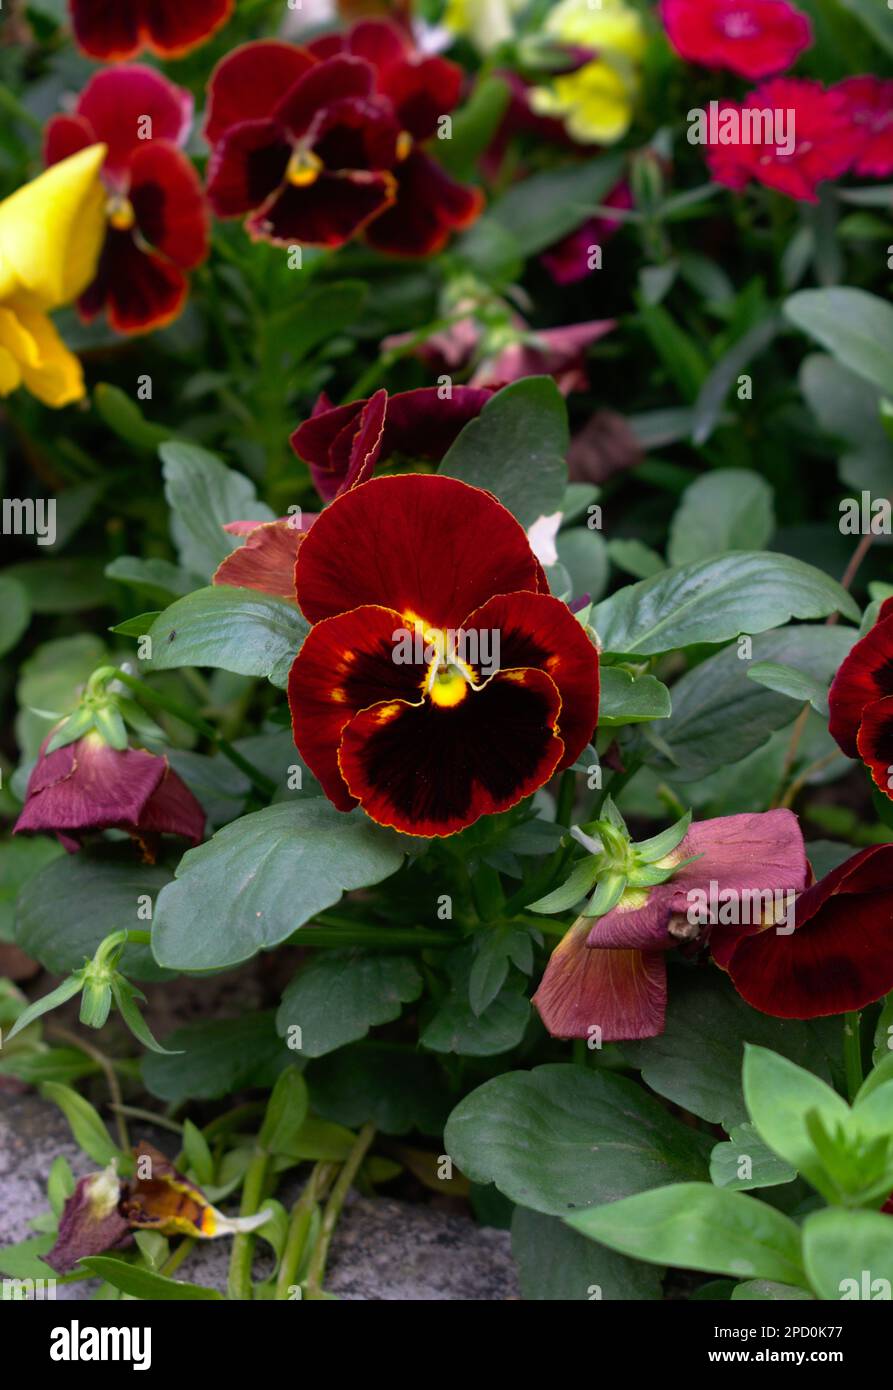 Garden Pansy Heartsease a type of large flowered hybrid plant cultivated as a garden Flower Stock Photo